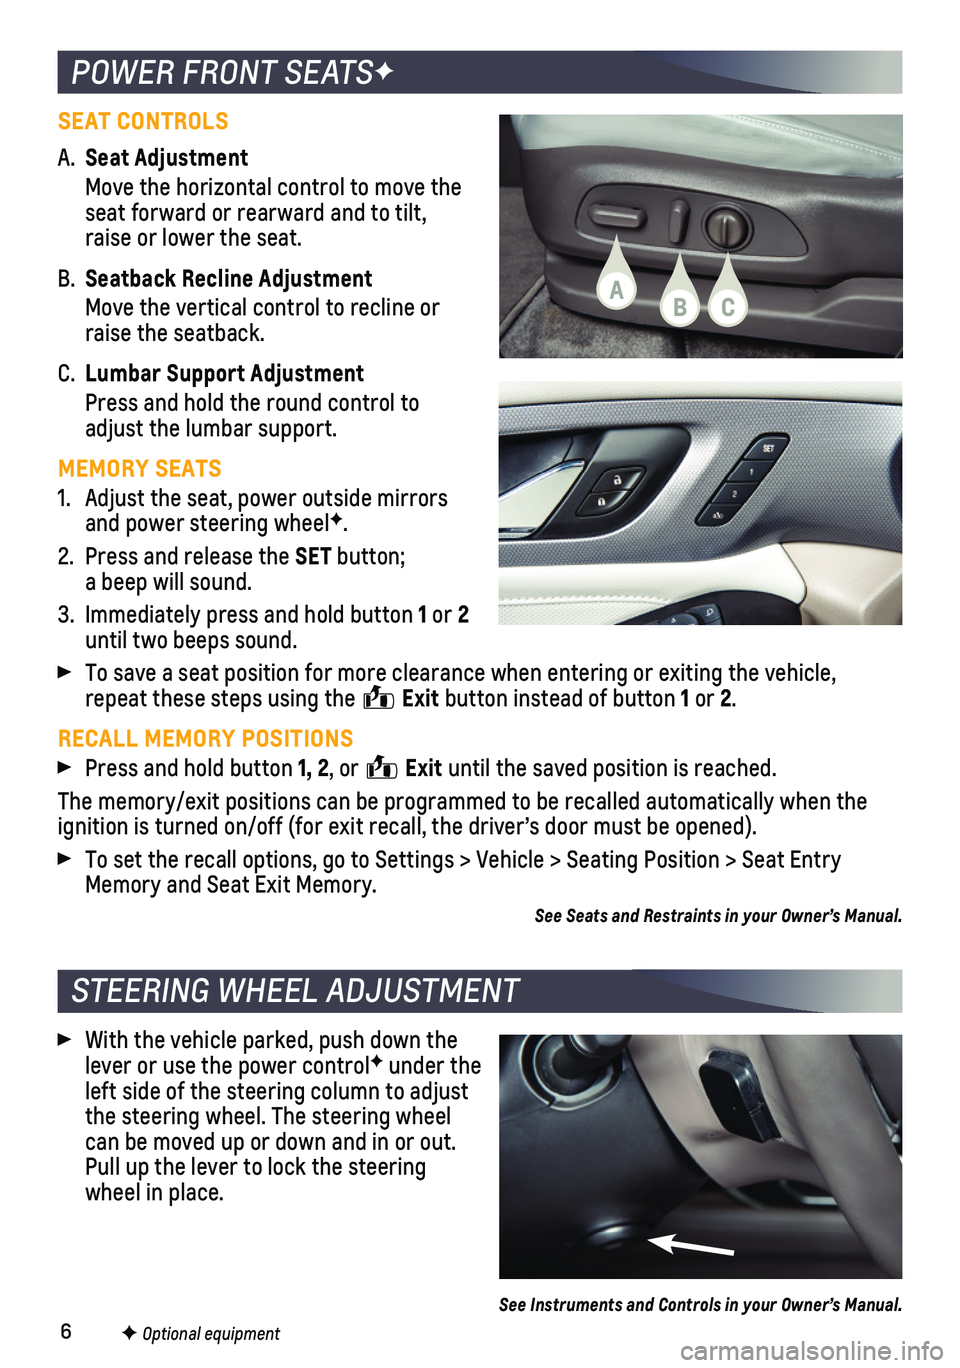 CHEVROLET TRAVERSE 2021  Get To Know Guide 6
POWER FRONT SEATSF
STEERING WHEEL ADJUSTMENT
F Optional equipment
SEAT CONTROLS
A. Seat Adjustment
 Move the horizontal control to move the seat forward or rearward and to tilt, raise or lower the 